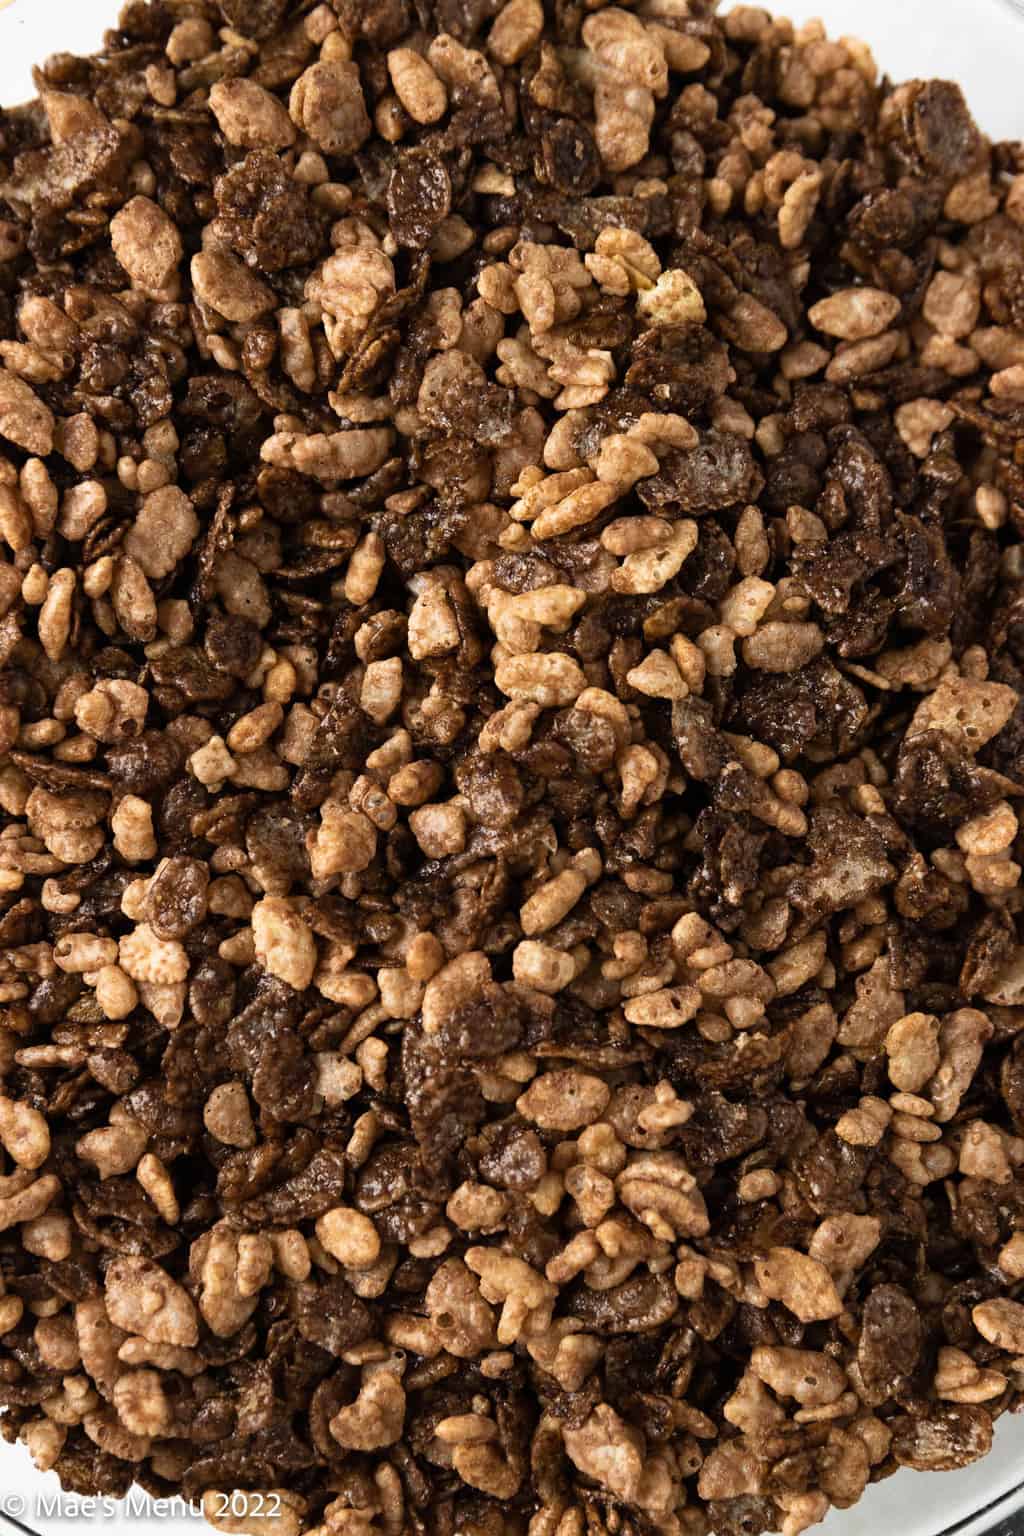 An up-close overhead shot of a bowl of cocoa crisps and cocoa pebbles.